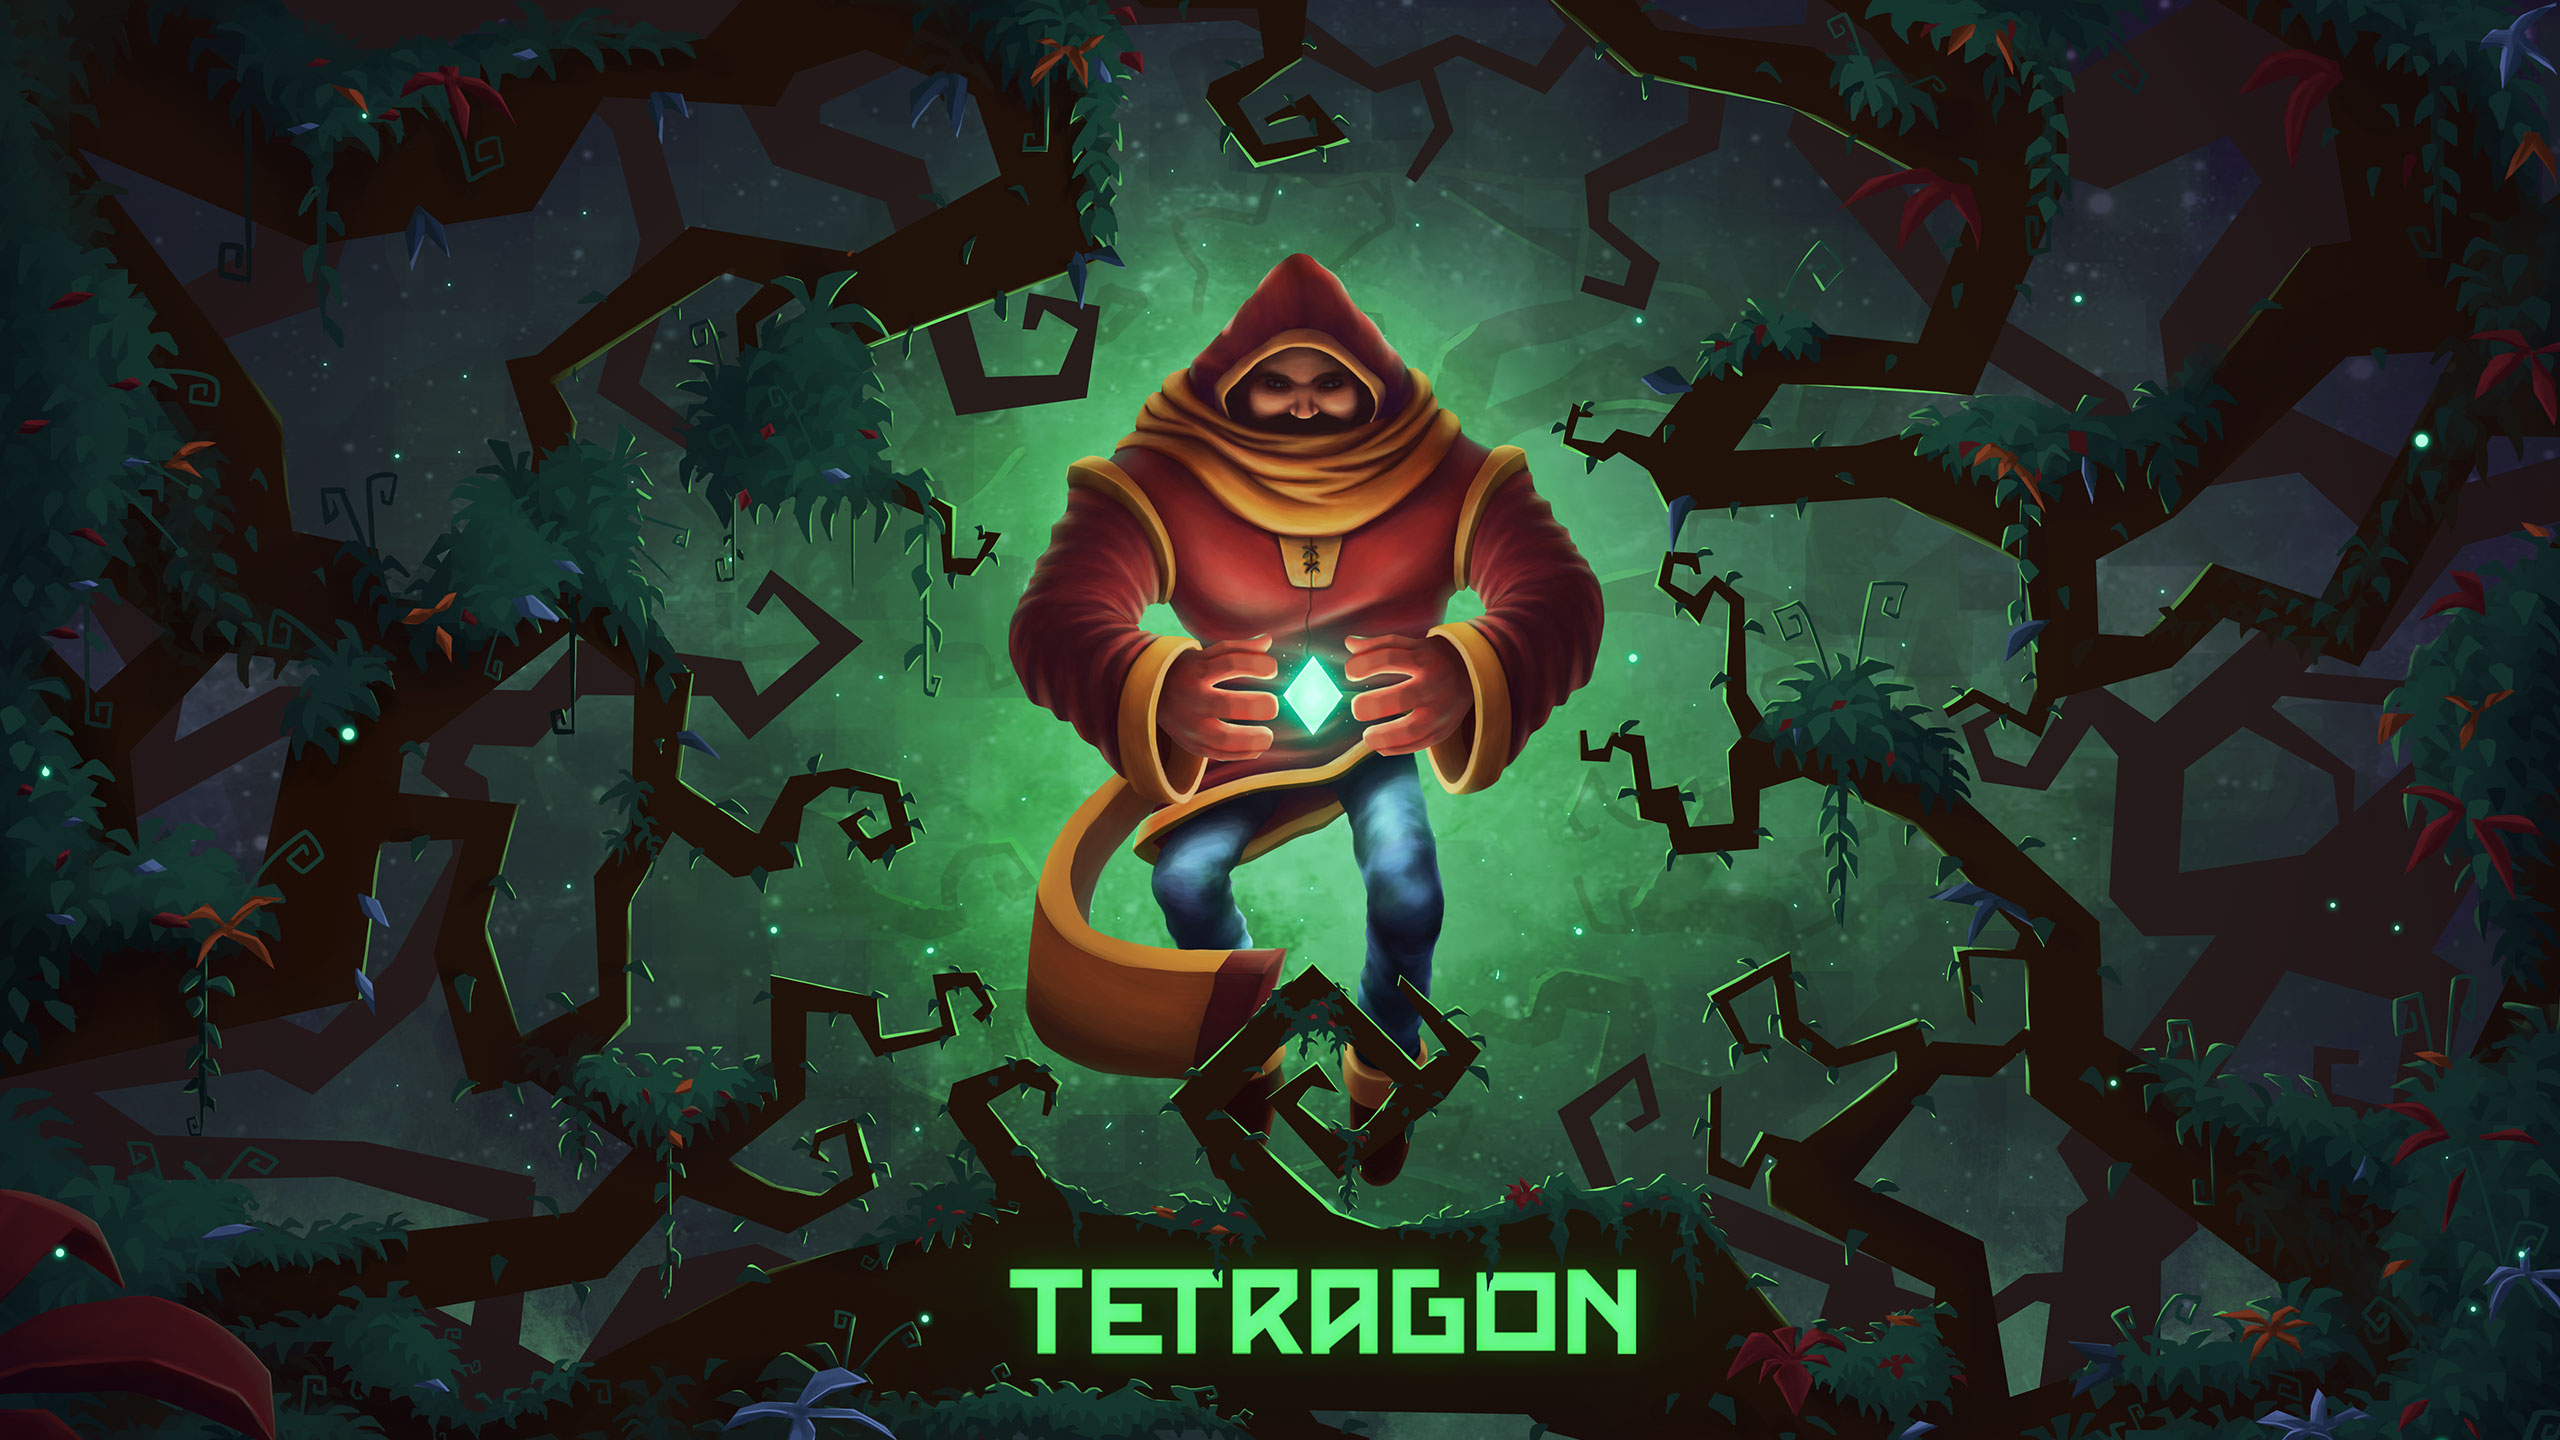 The Tetragon key art featuring the father